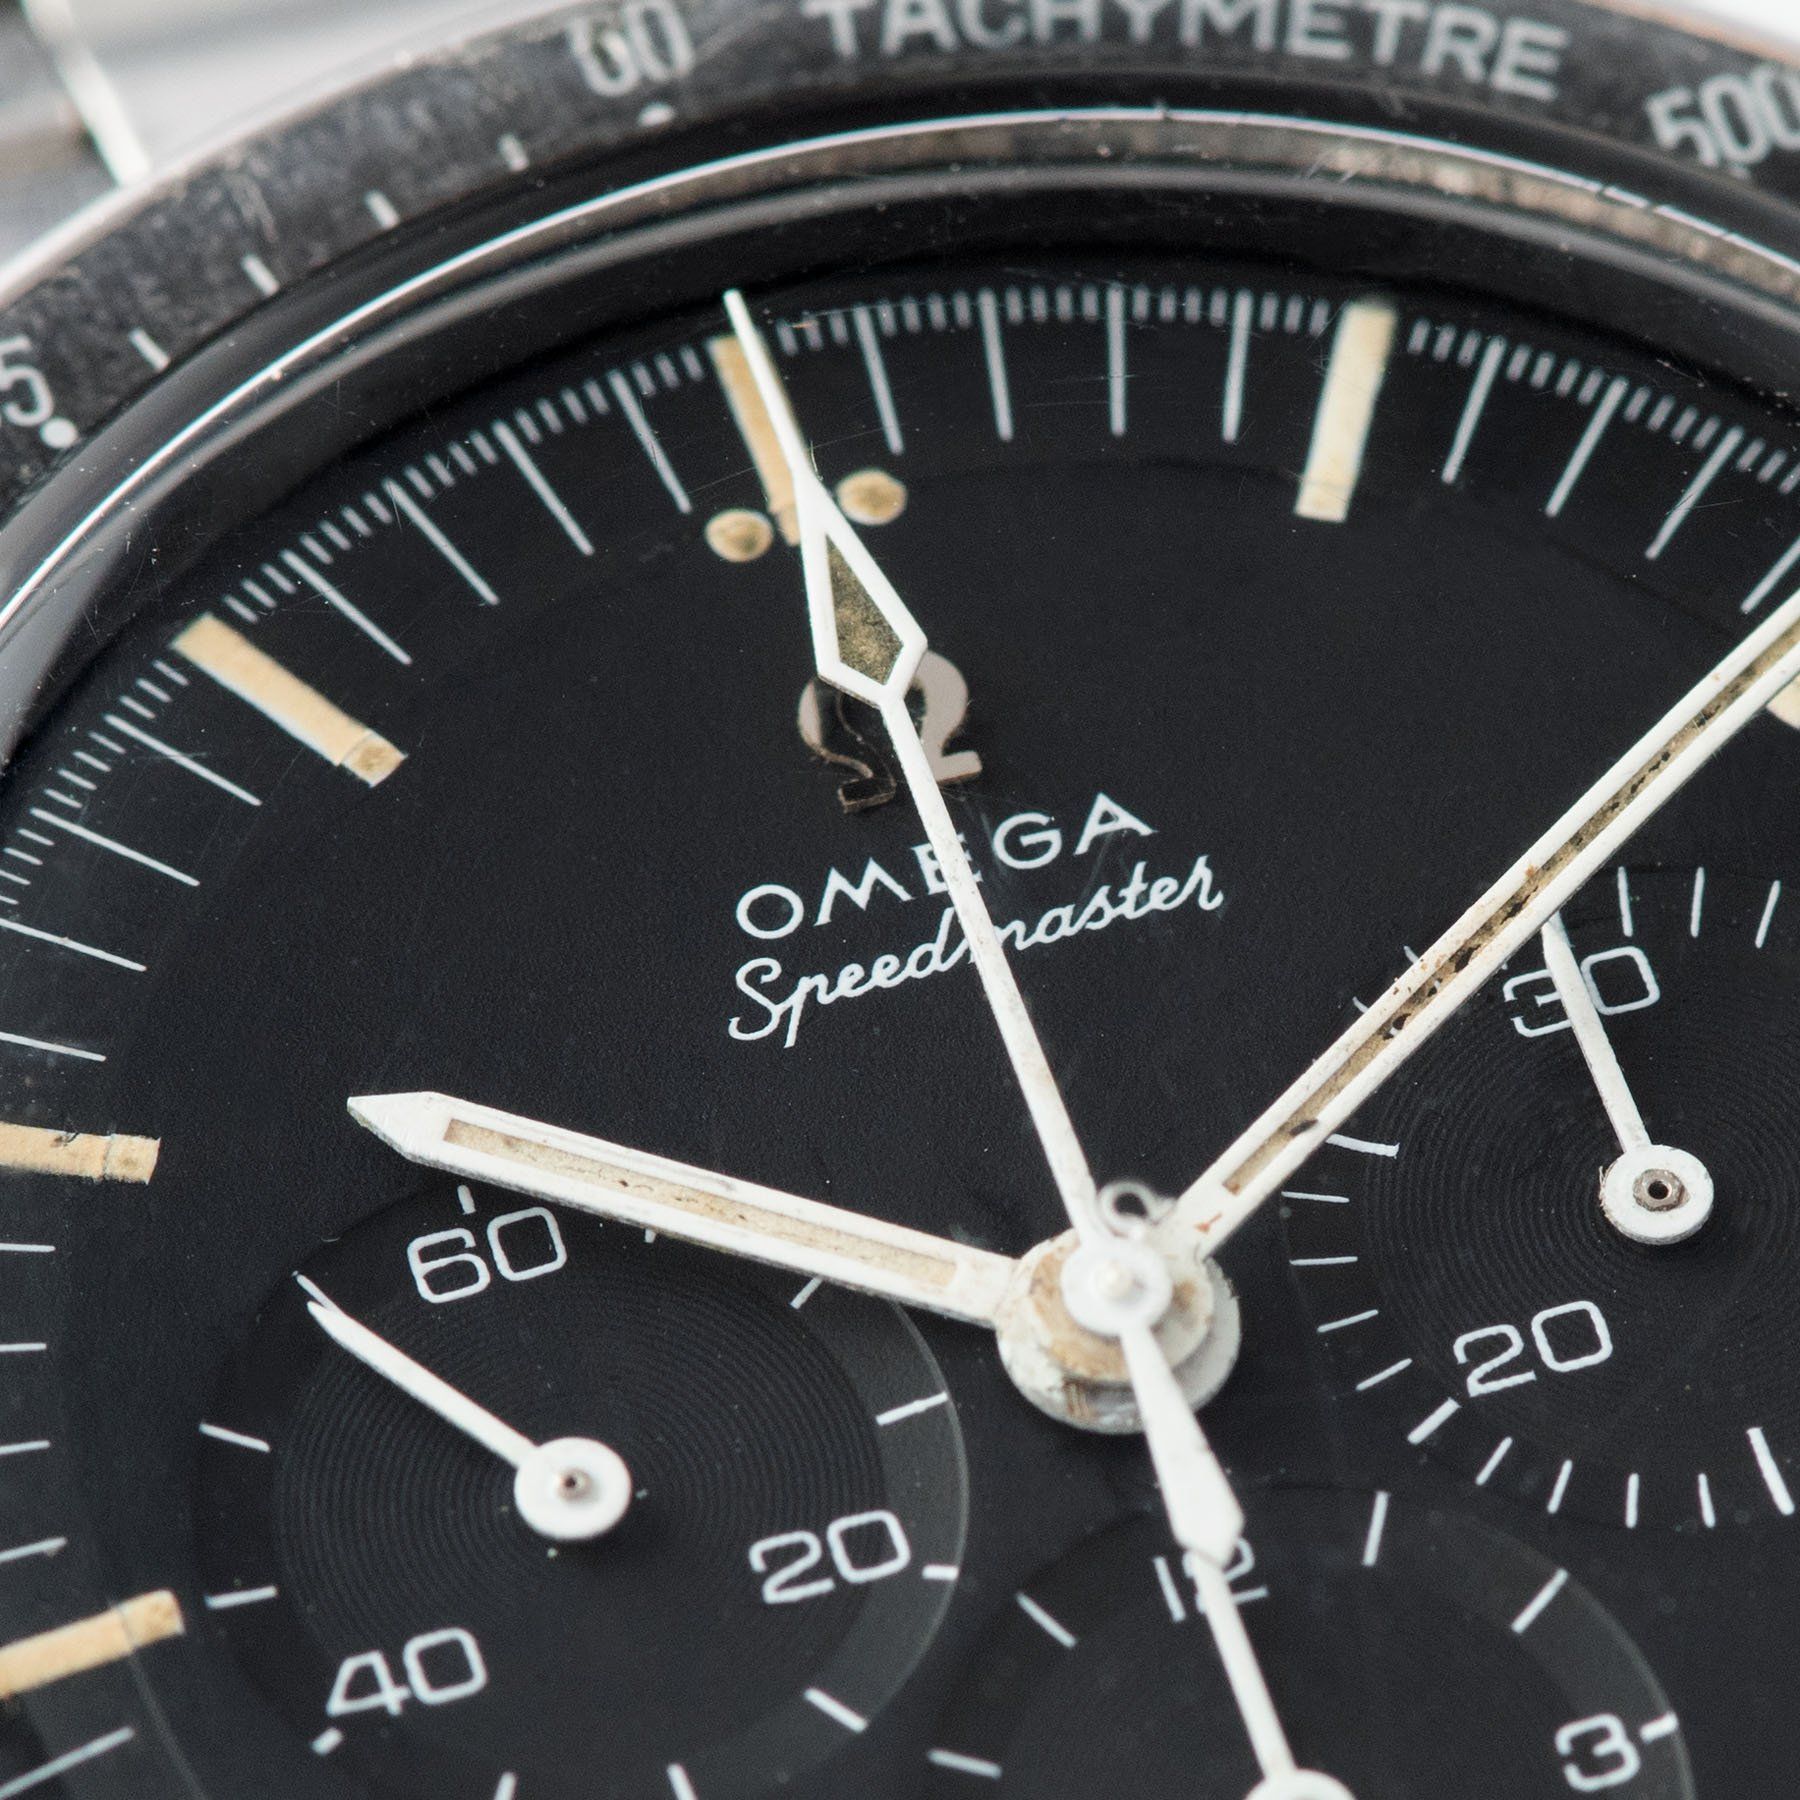 Omega Speedmaster Ed White ref 105.003 with long hour markers